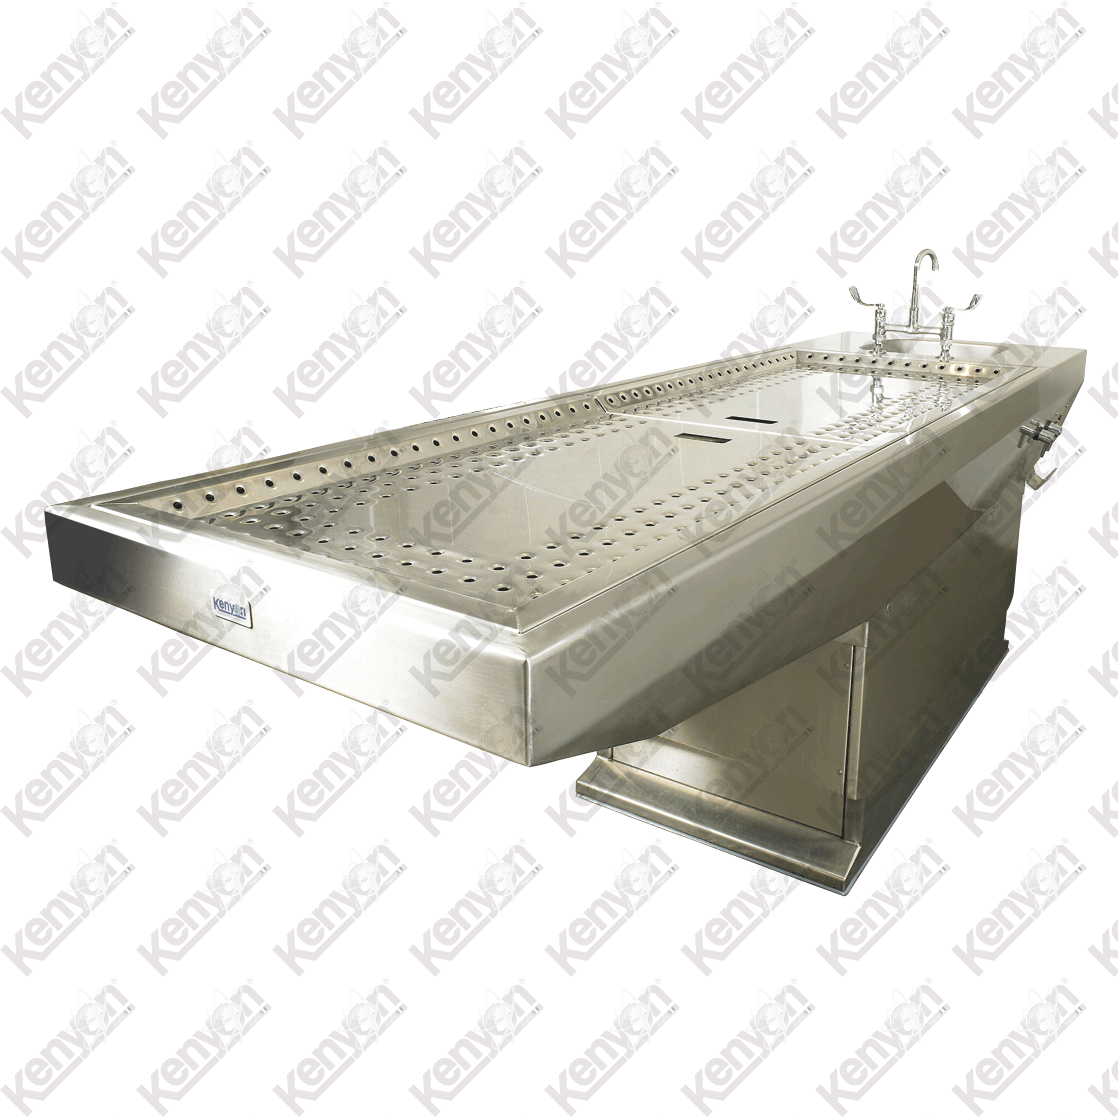 Mortuary Autopsy Table with extractor | Coffin Handling | Mortuary Equipment | Funeral House Supplies | WJ Kenyon